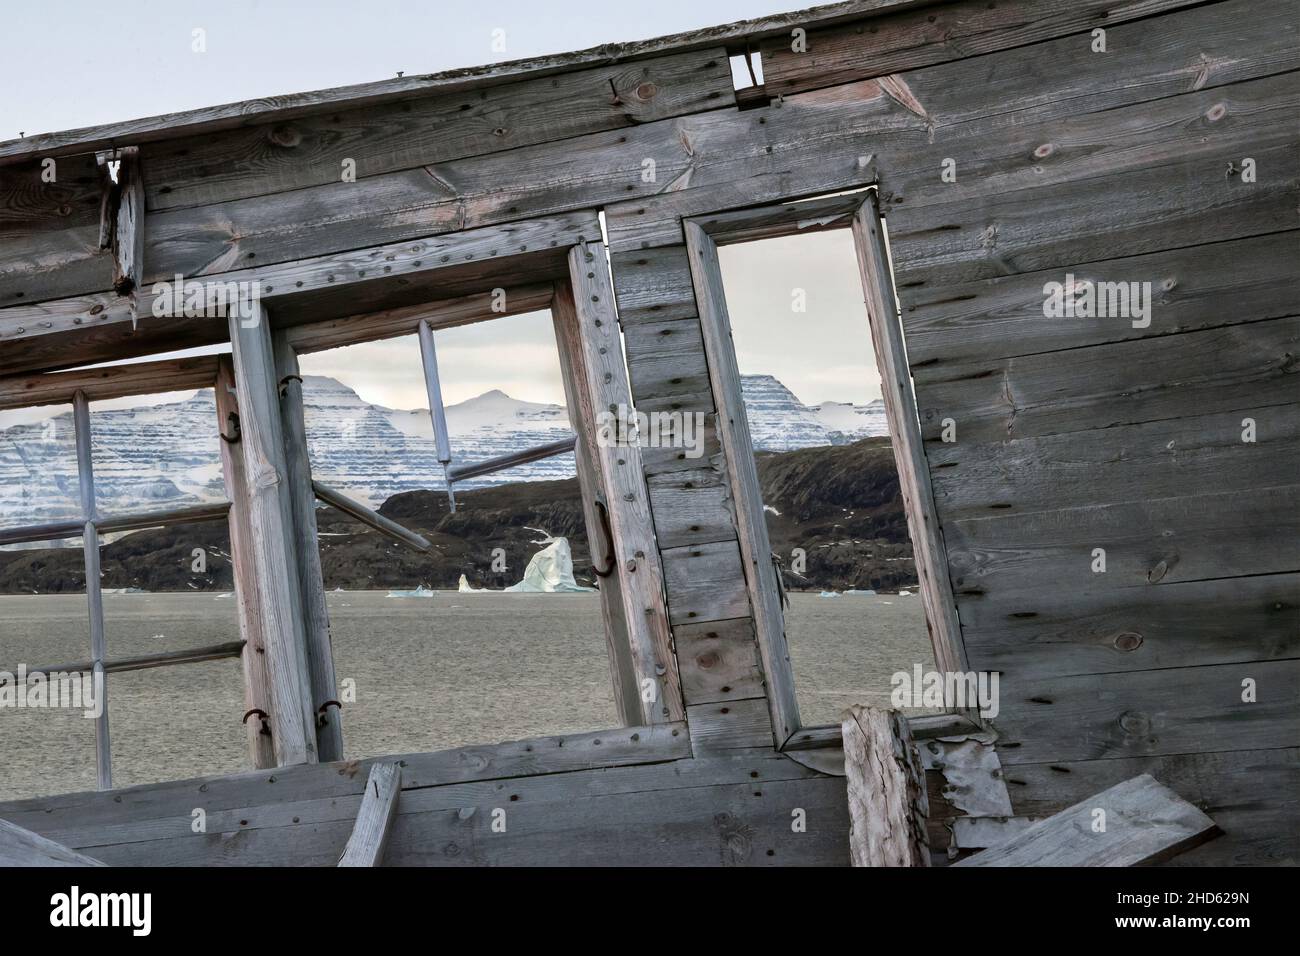 View of Fonfjord and Volquaart von Kyst mountains through the windows of abandoned cabin, Danmark O, Scoresby Sund, Greenland Stock Photo